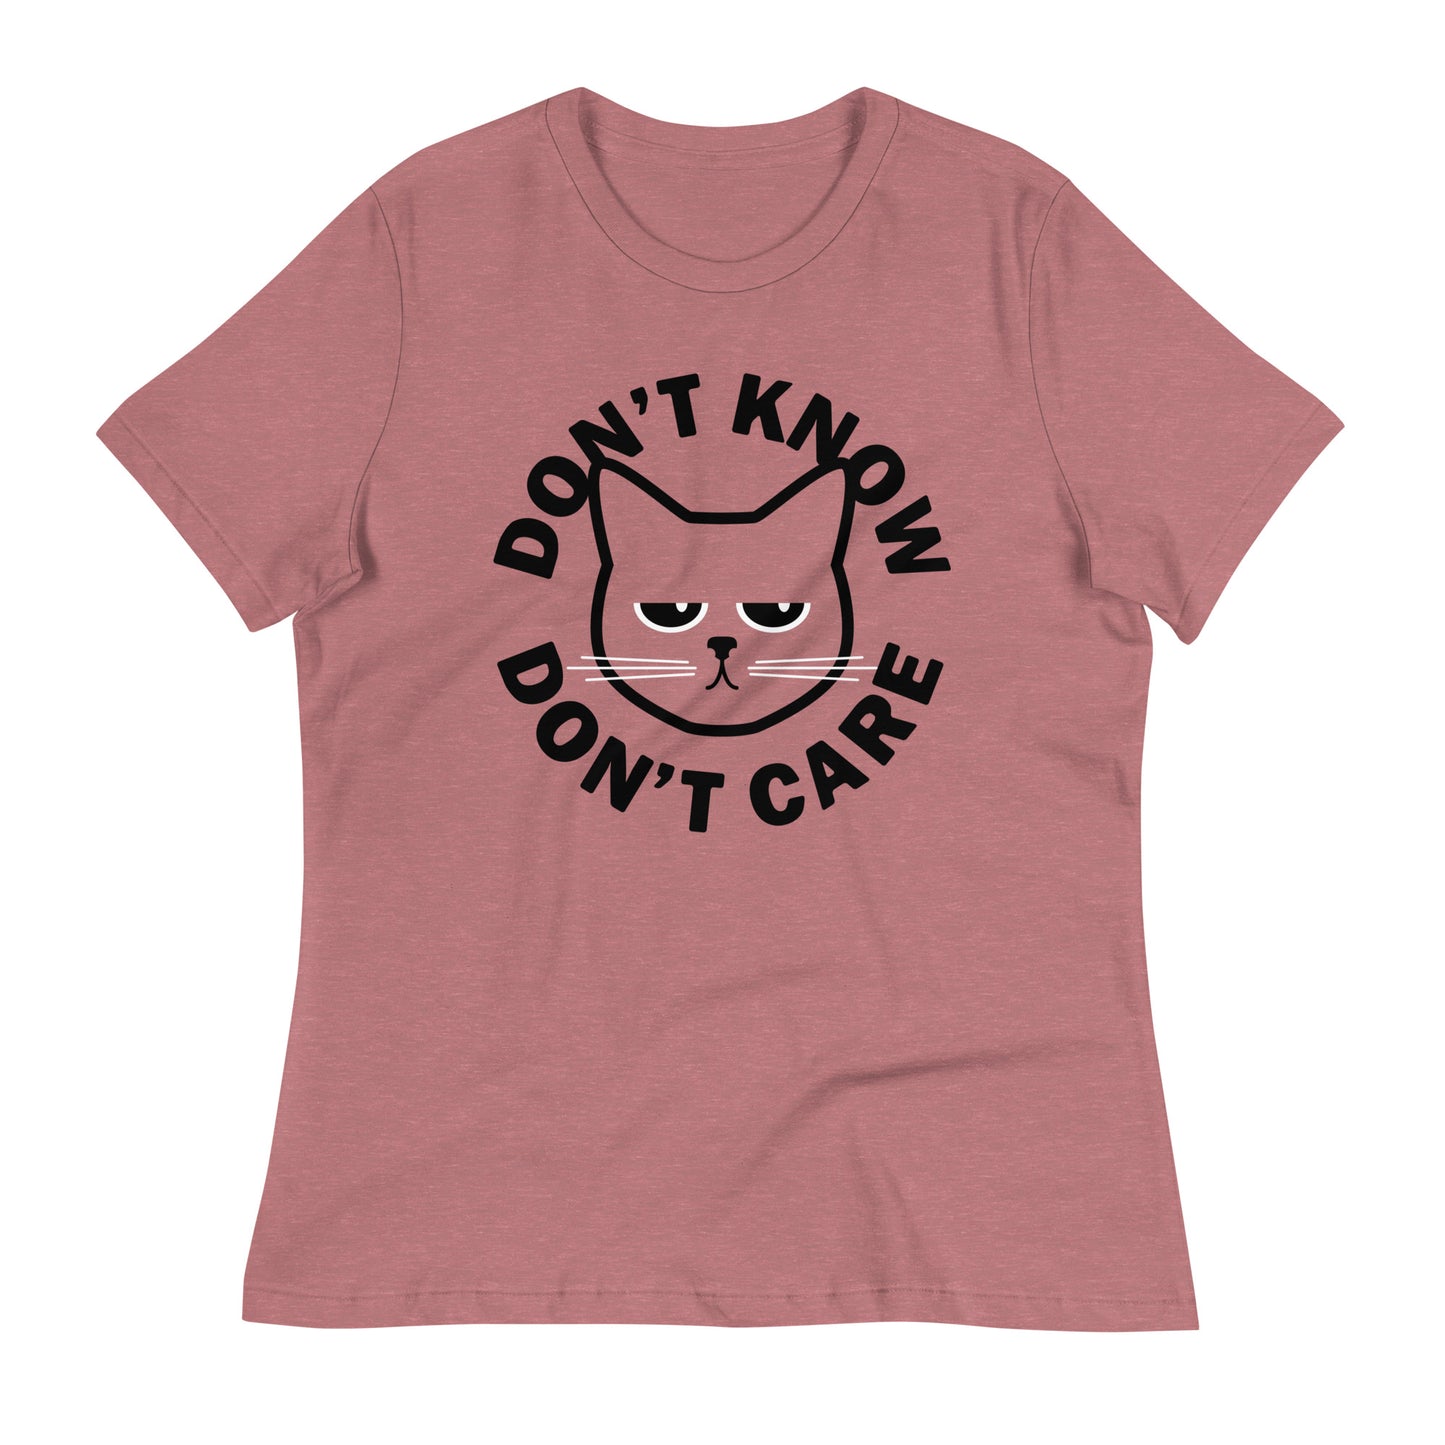 Don't Know Don't Care Women's Signature Tee